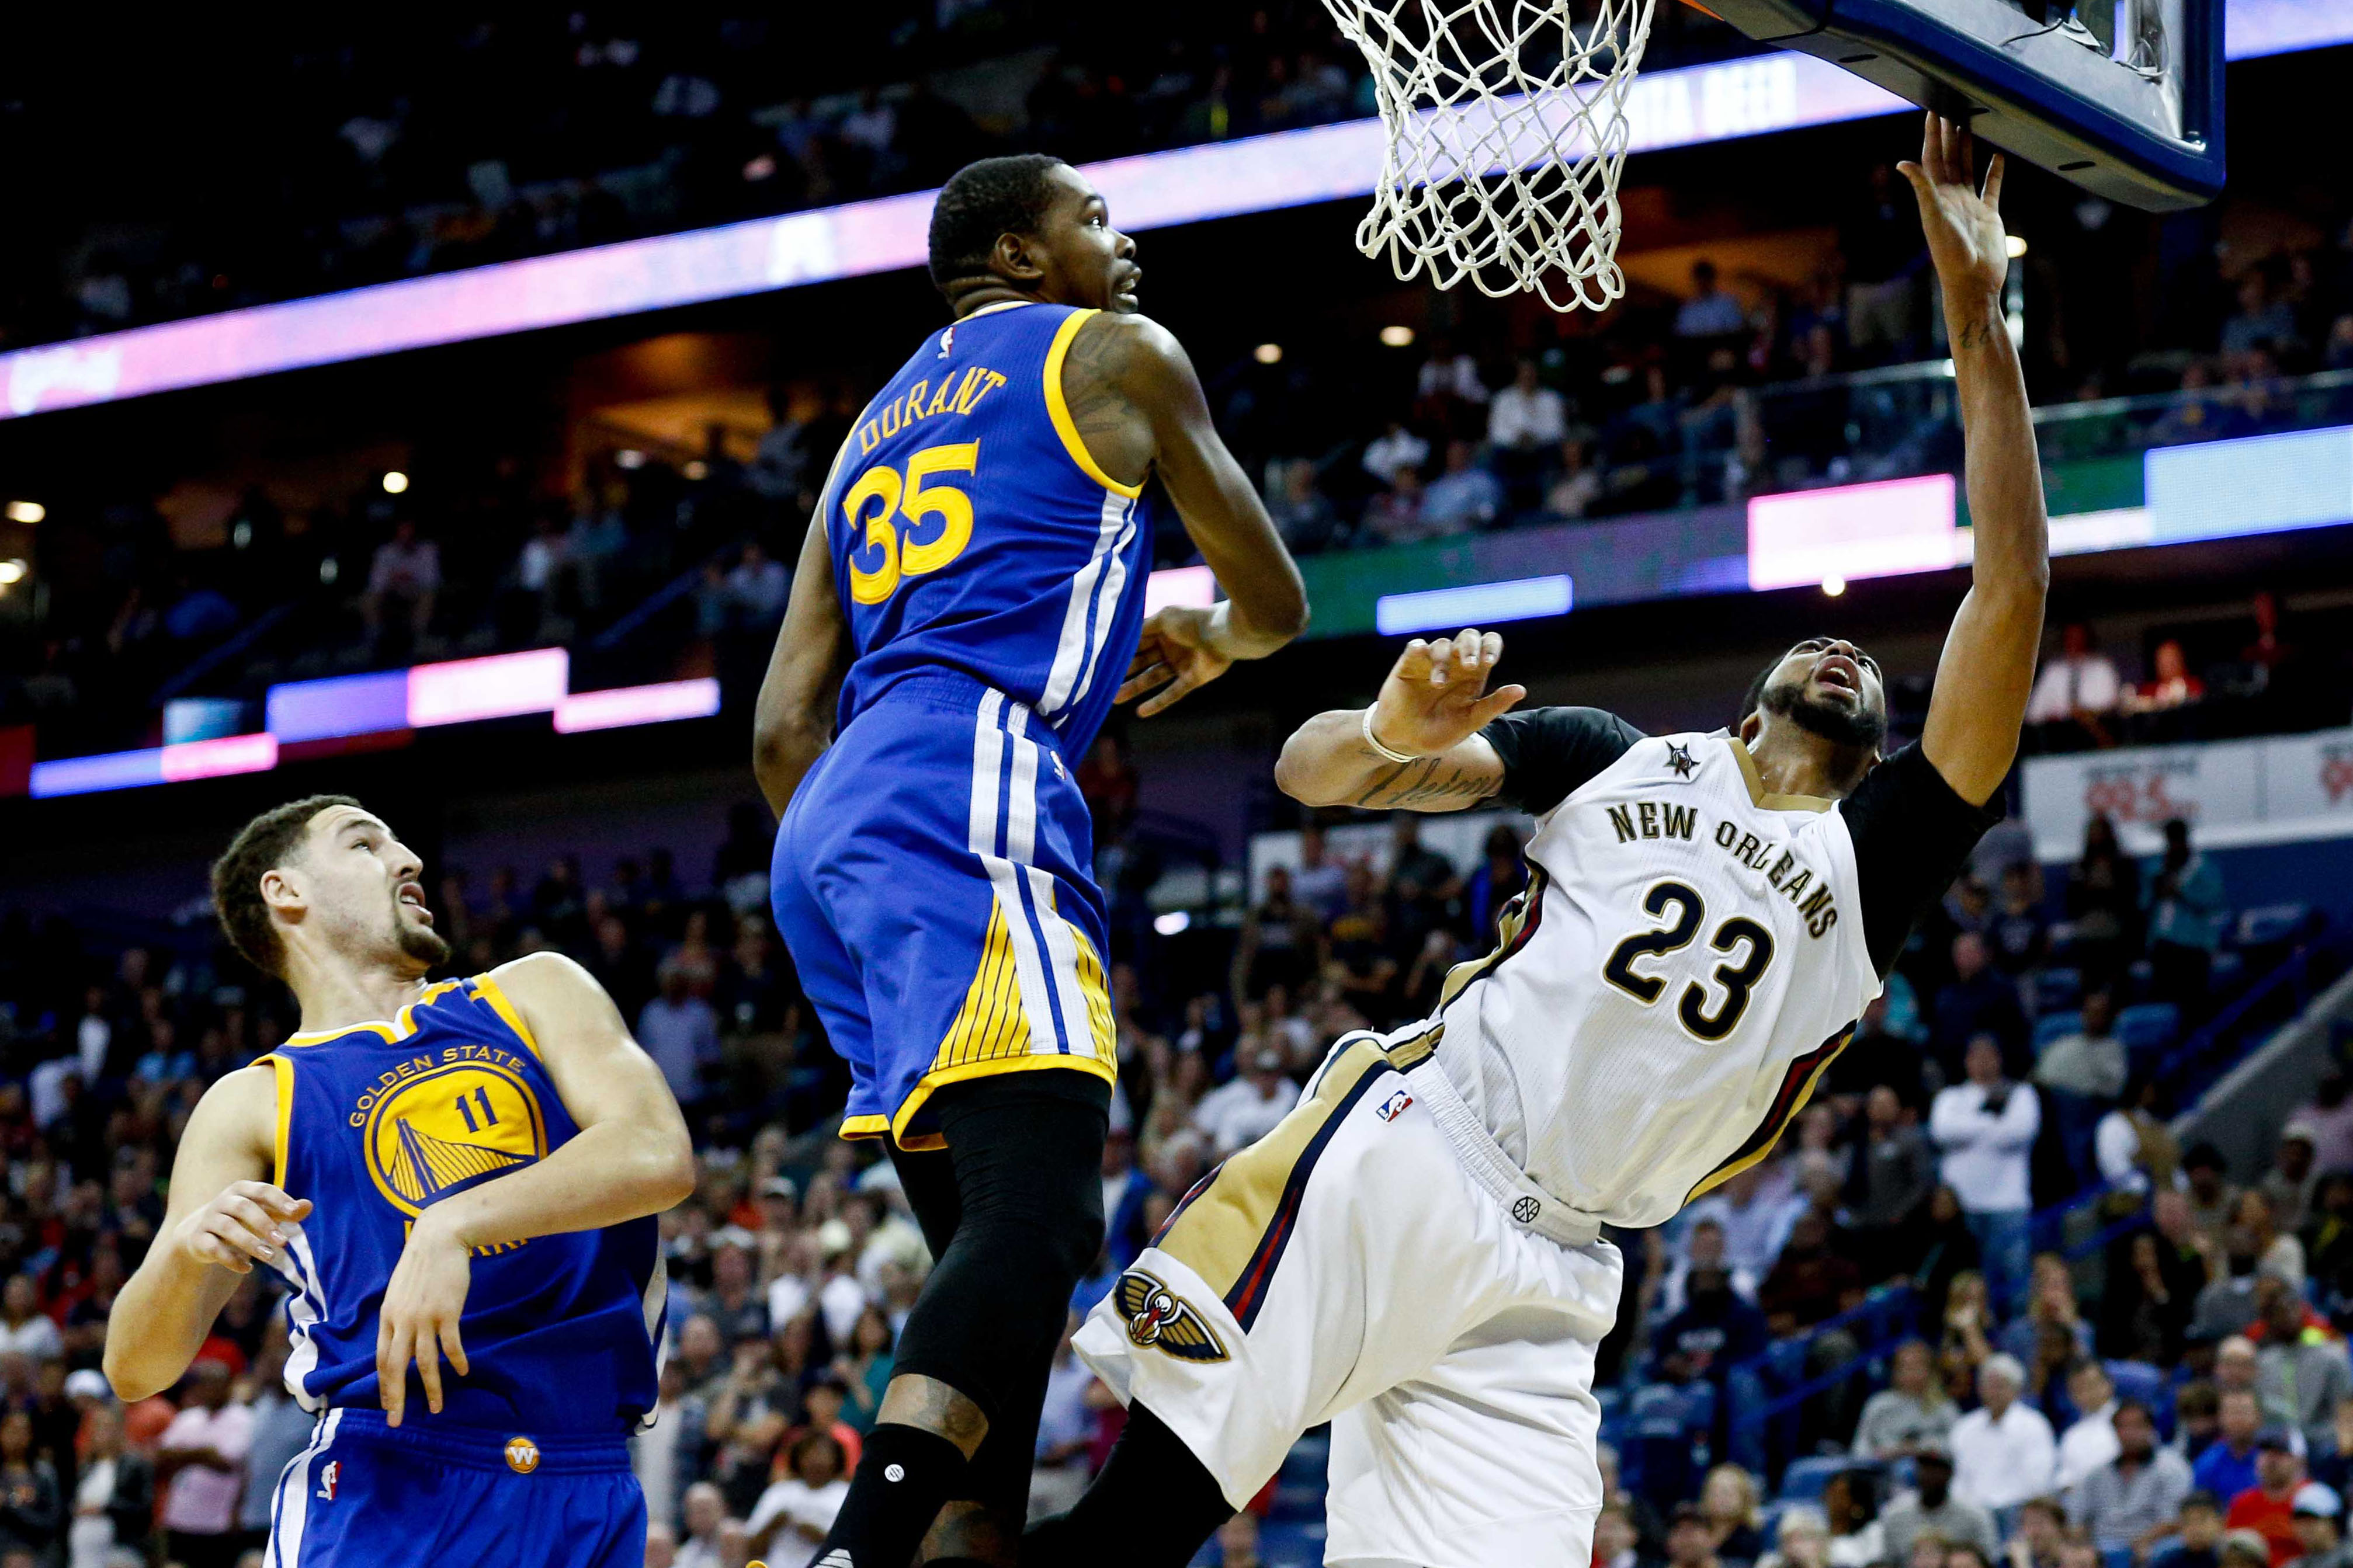 NBA: Golden State Warriors at New Orleans Pelicans